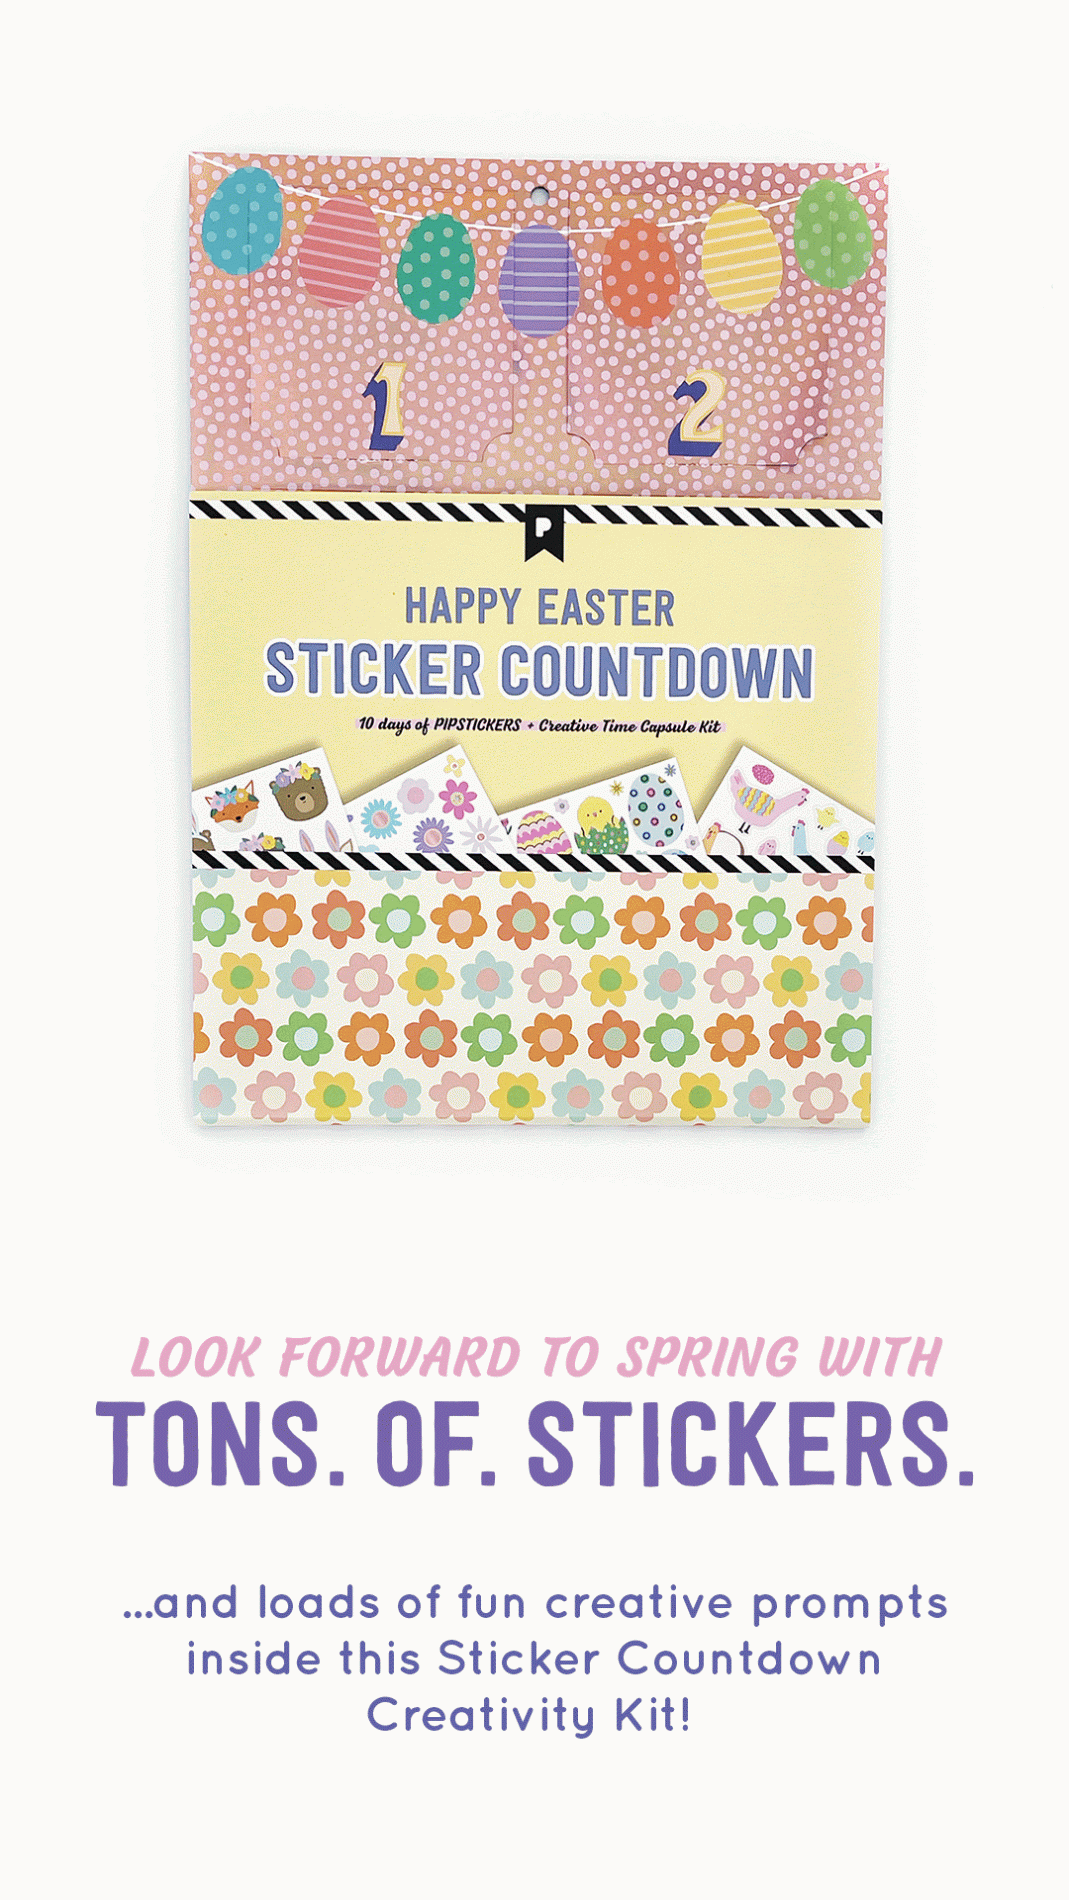 Pipsticks 2022 Easter Countdown Calendar: 10 Days of Easter Themed Stickers!